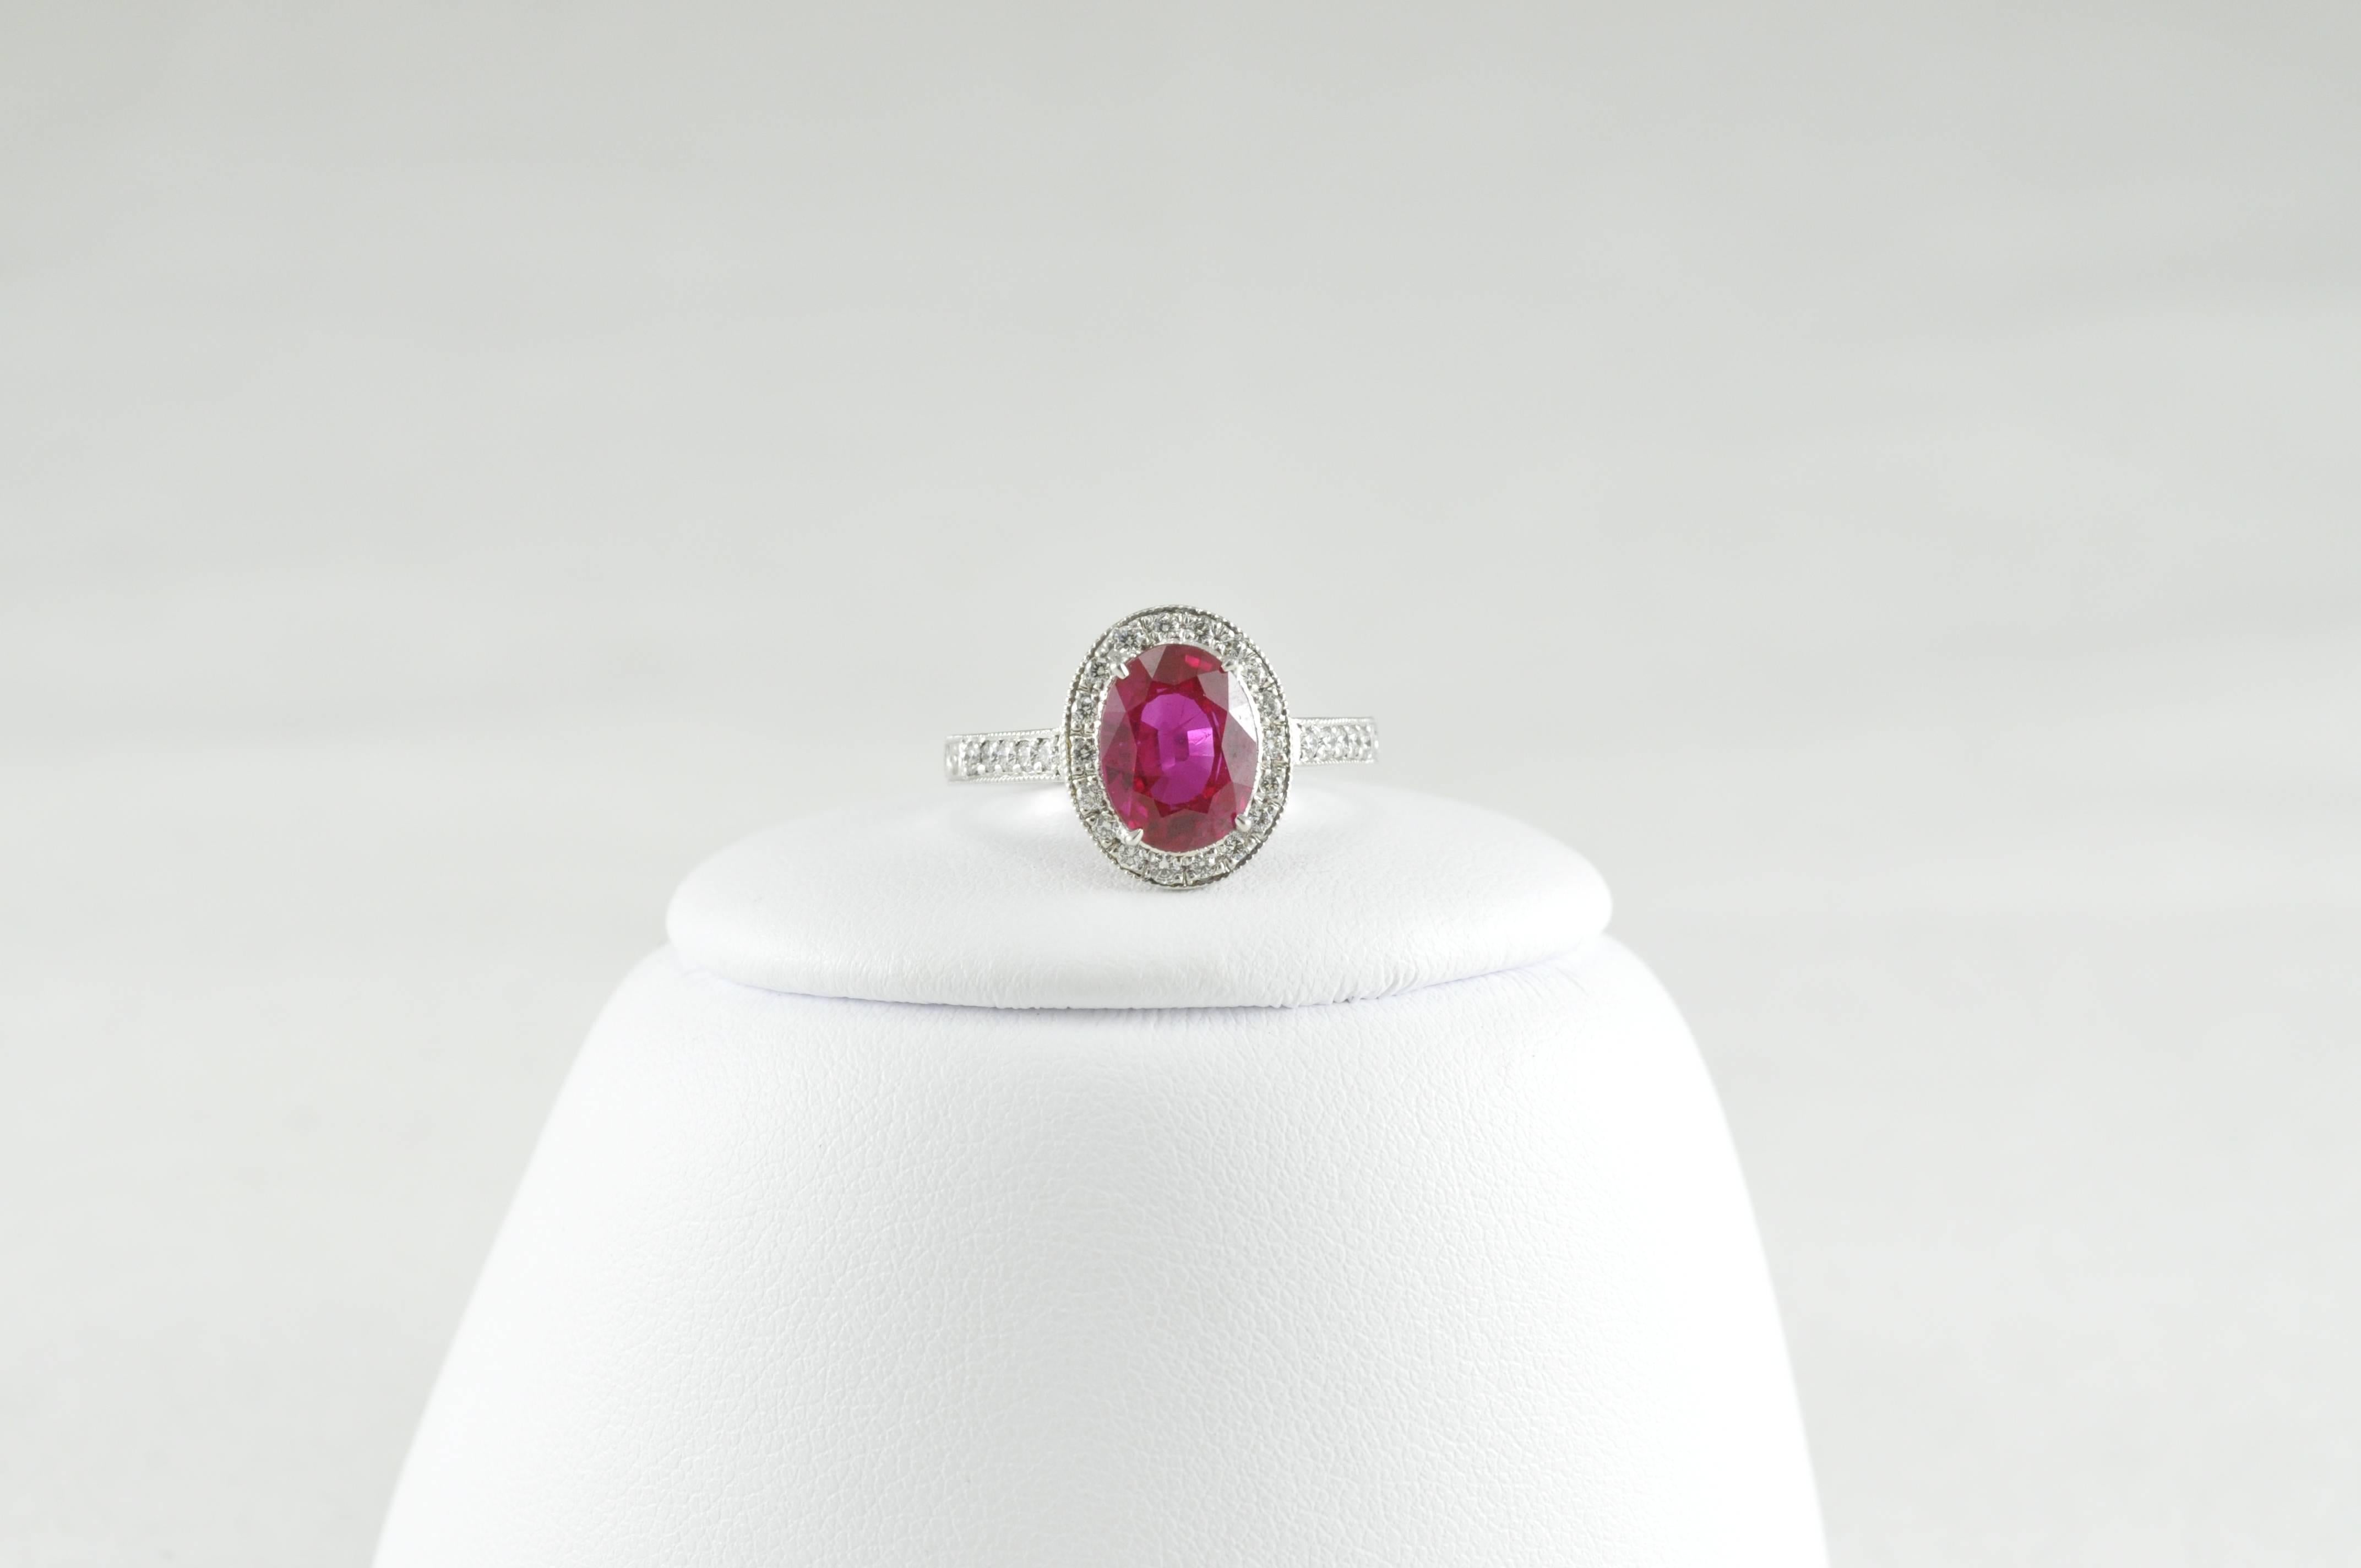 Size 6.5 and can be sized to fit. 
2.51CT Burma Ruby Platinum Ring with .26CT Pave Diamond Ring.   